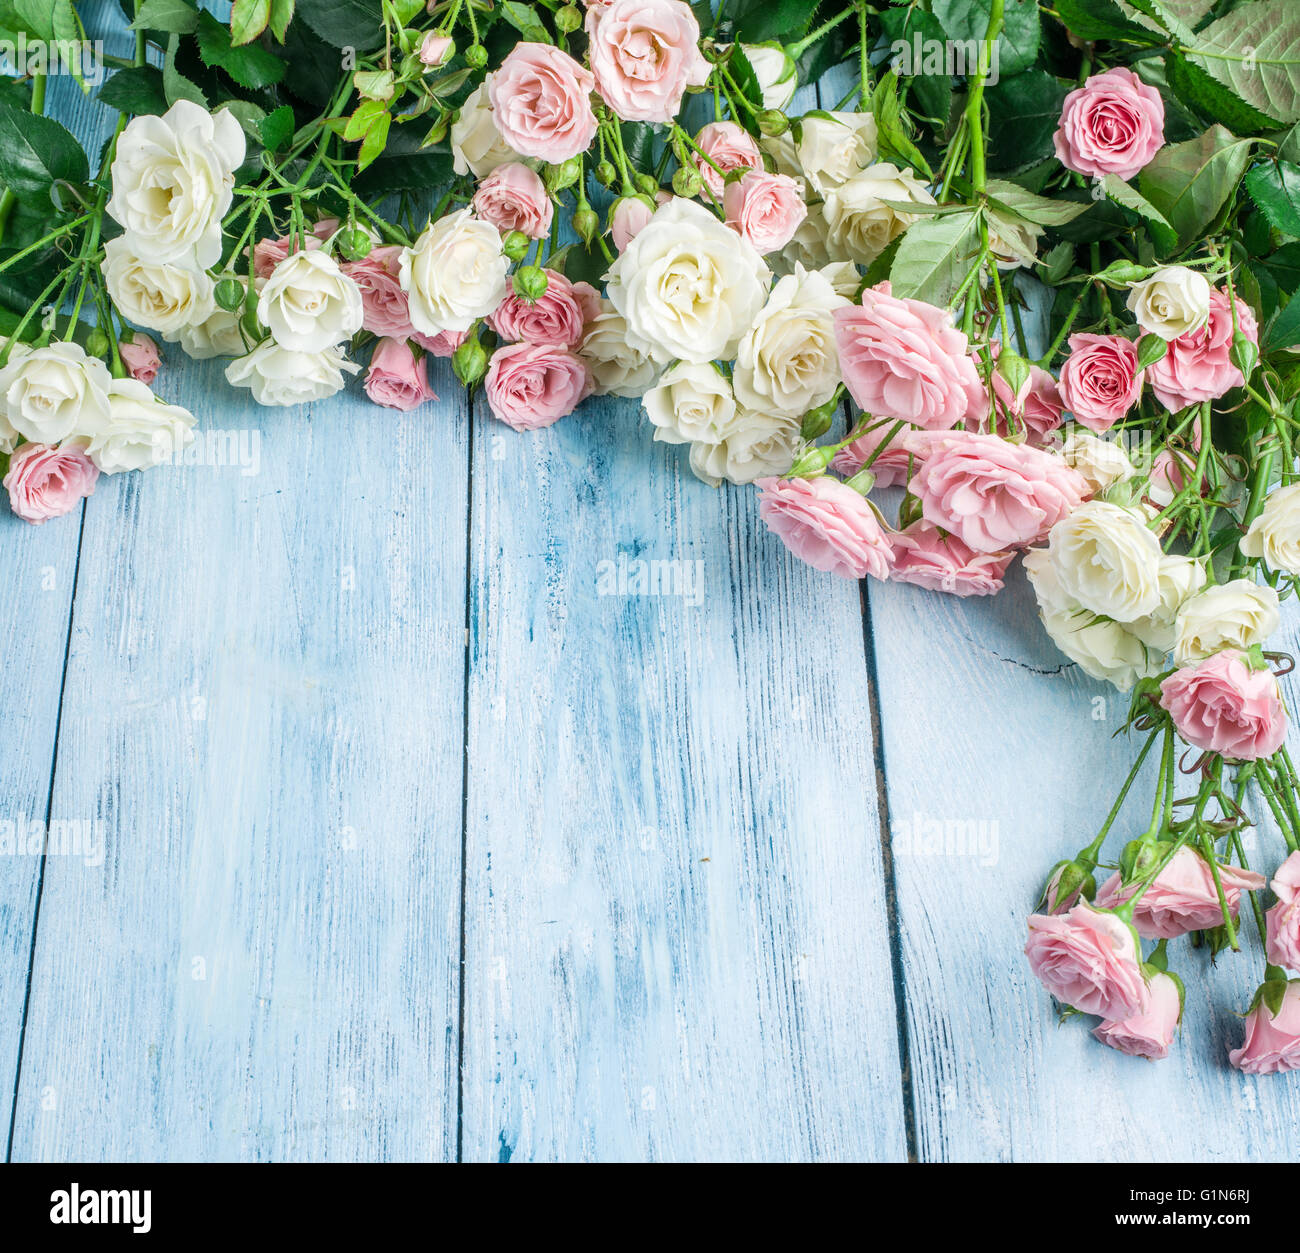 Delicate fresh roses on the blue wooden background. Stock Photo